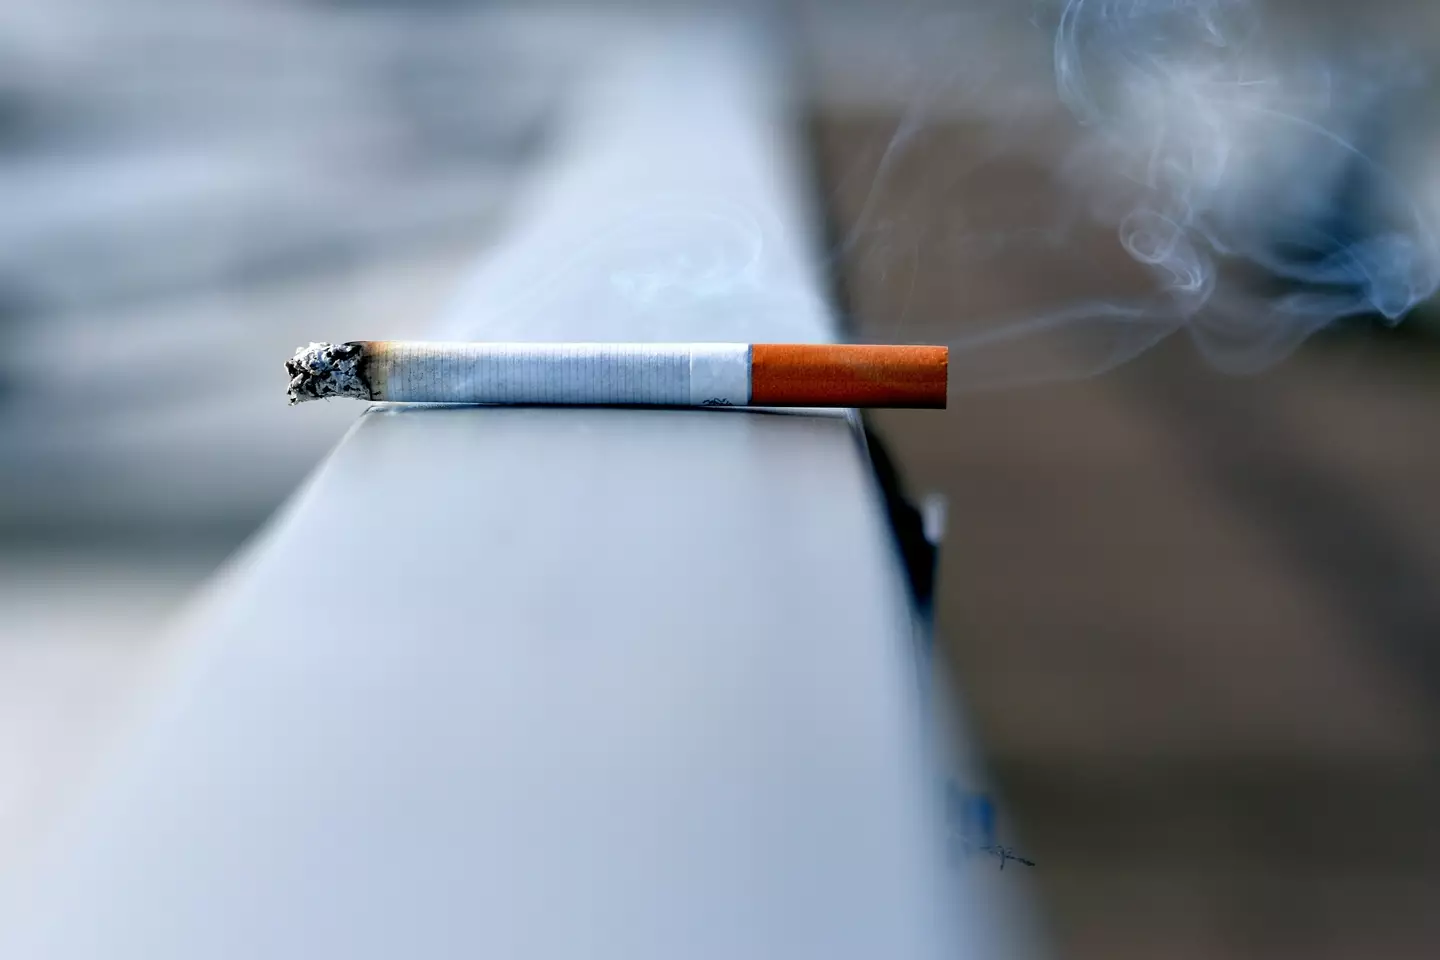 Price of cigarettes increased last year by 12 percent.